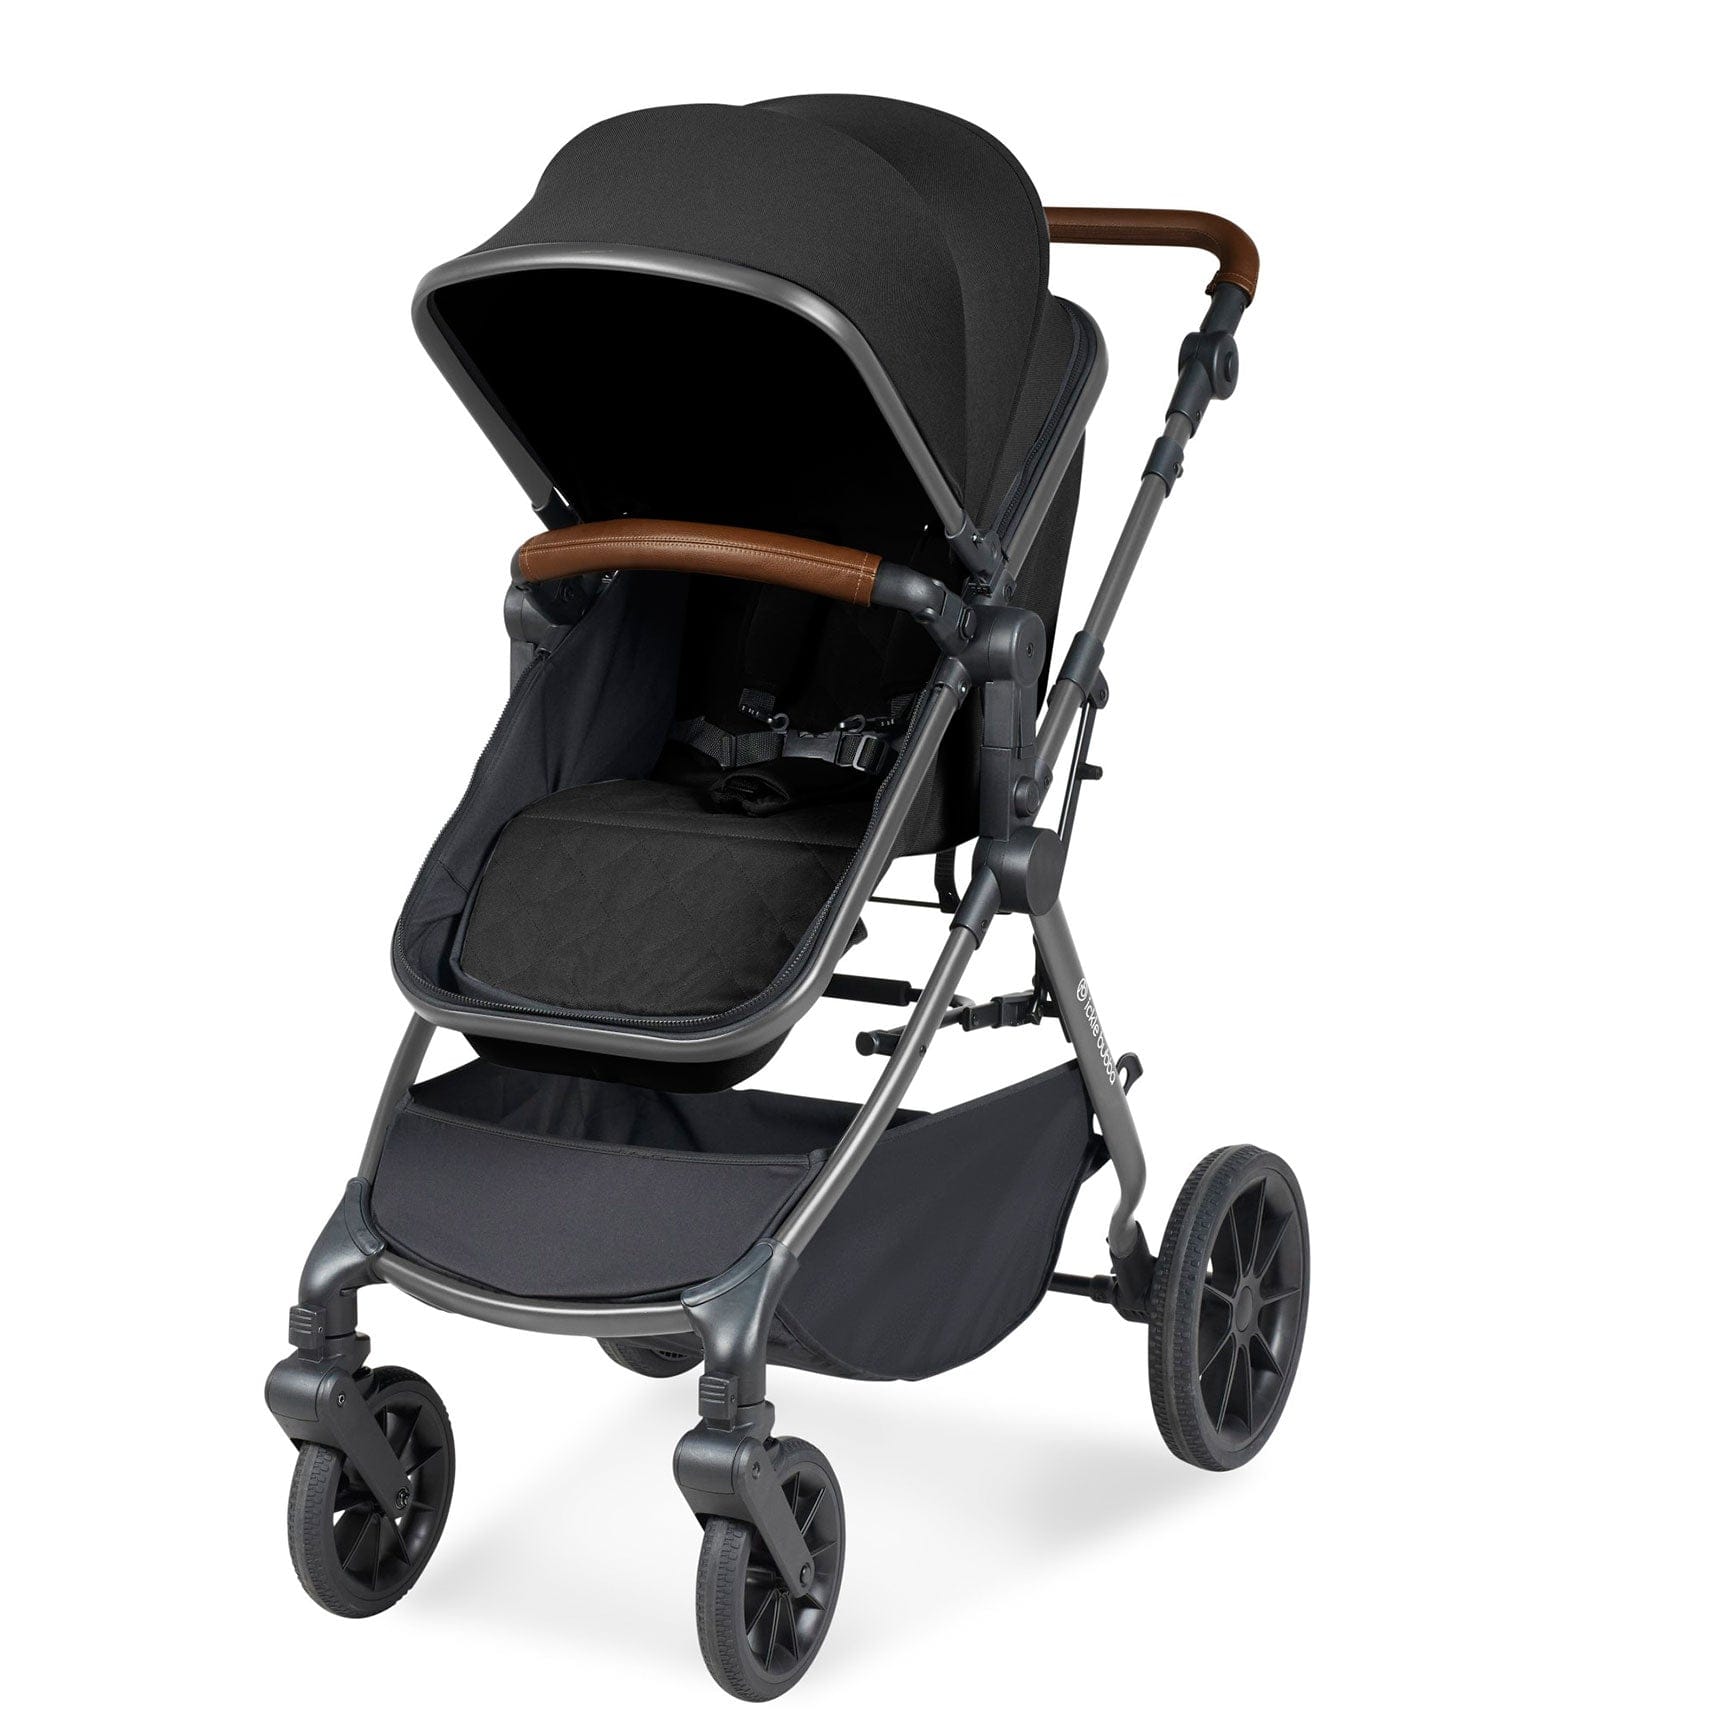 Ickle Bubba Ickle Bubba Cosmo 2 in 1 Plus Carrycot & Pushchair in Gun metal/Black Travel Systems 10-007-001-135 5056515025613